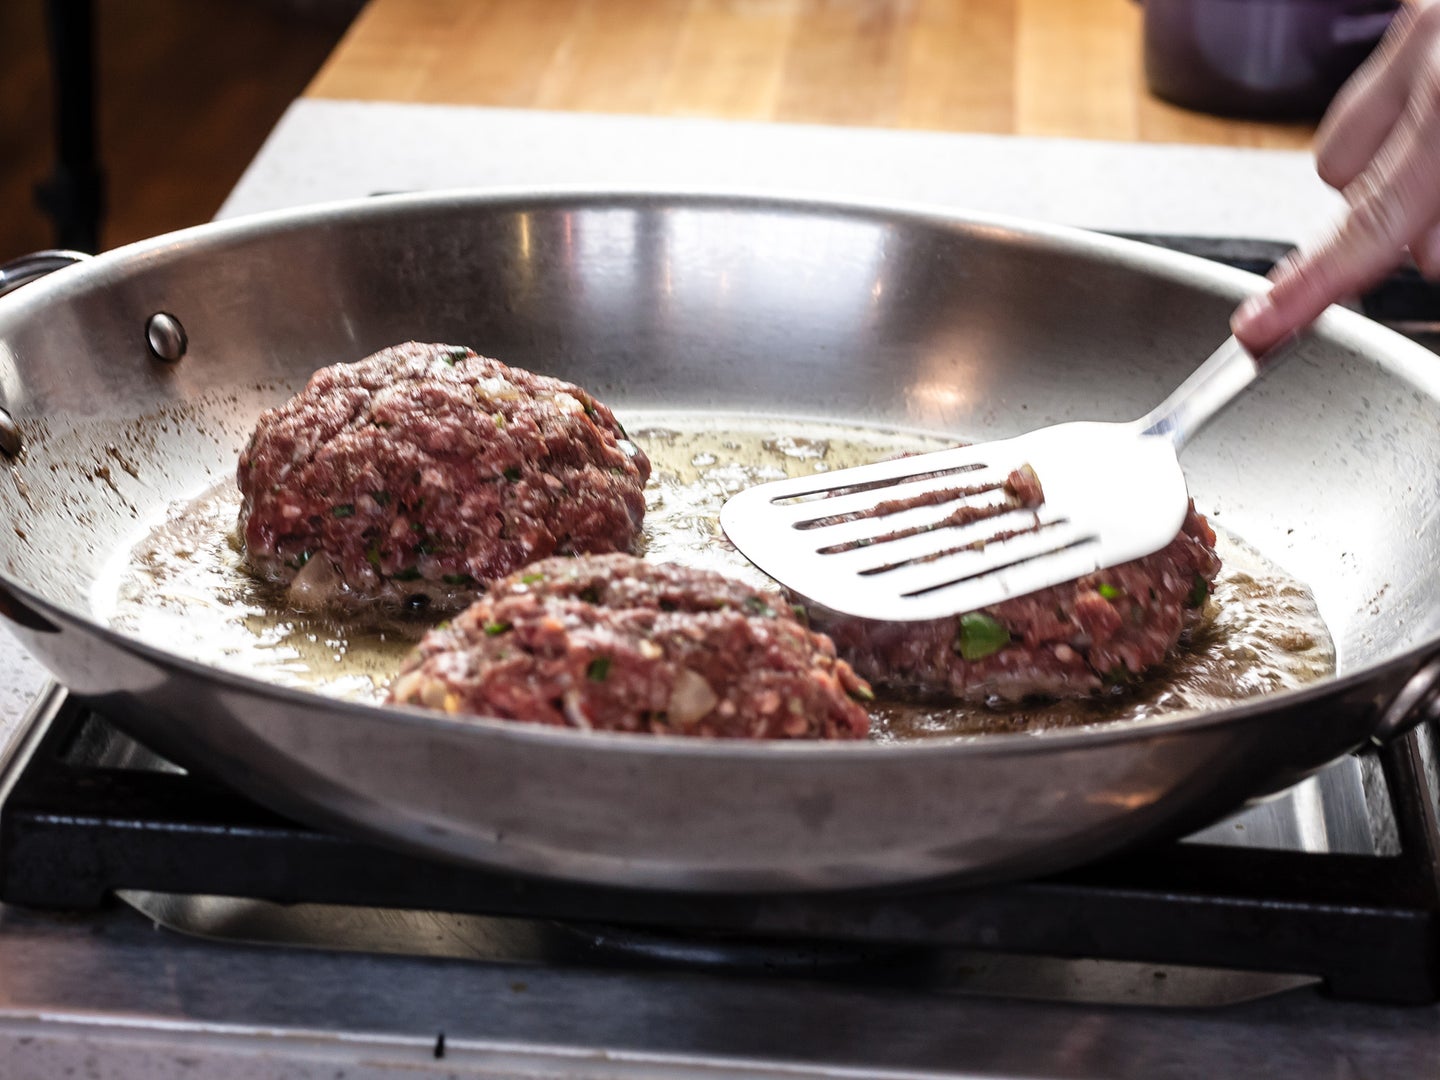 Three burgers getting cooked on a stainless steel pan while a hand with a spatula works with them